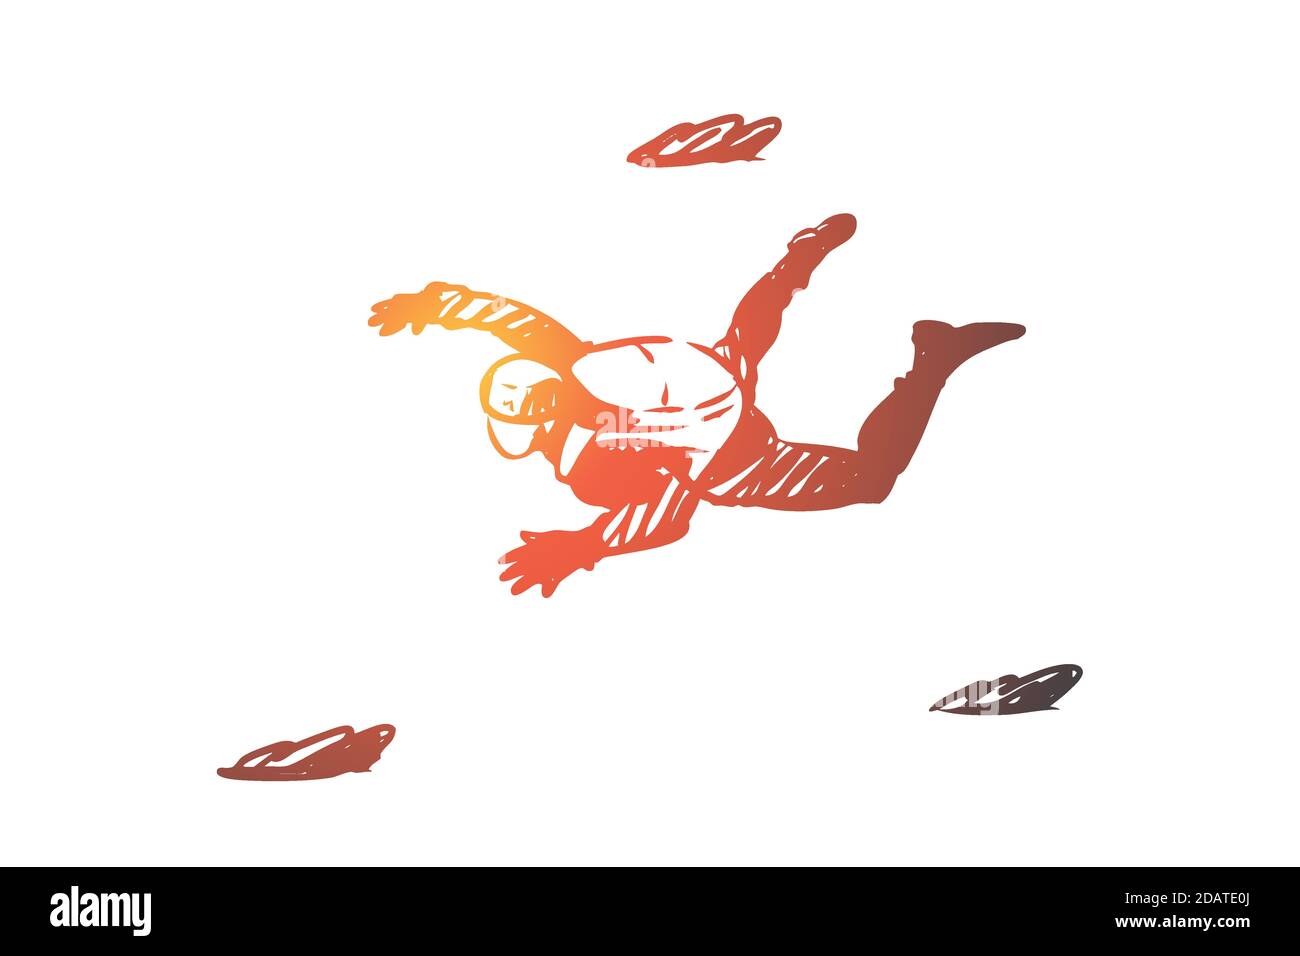 Extreme, jump, parachute, skydiving, fall concept. Hand drawn isolated vector. Stock Vector